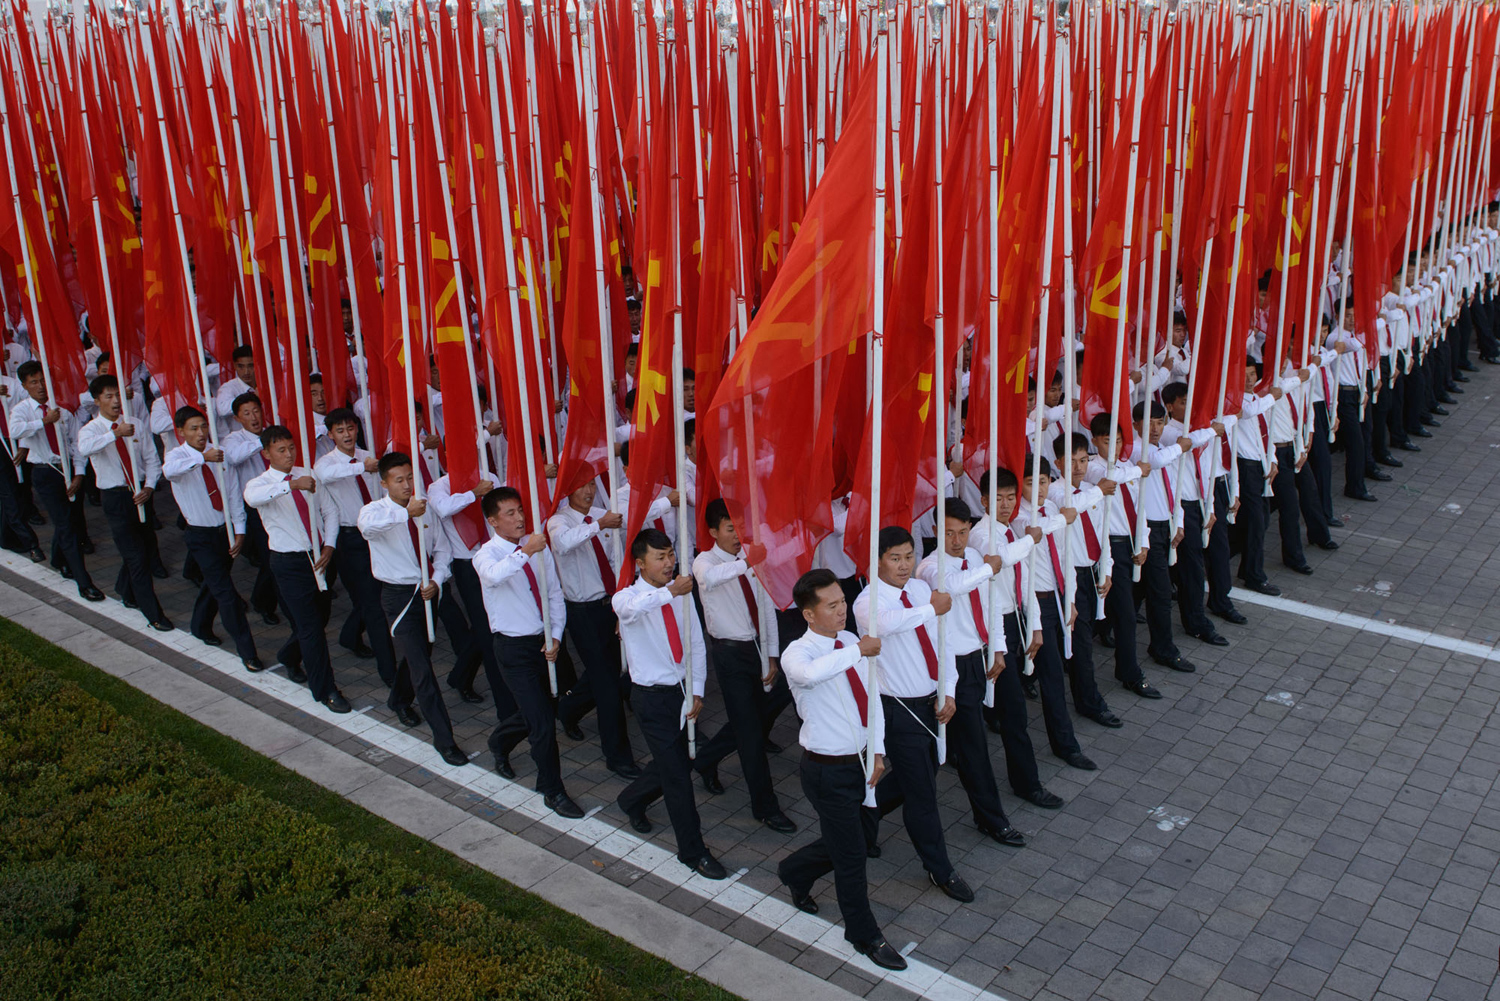 North Korea Marks 70 Years of Workers’ Party Rule 09